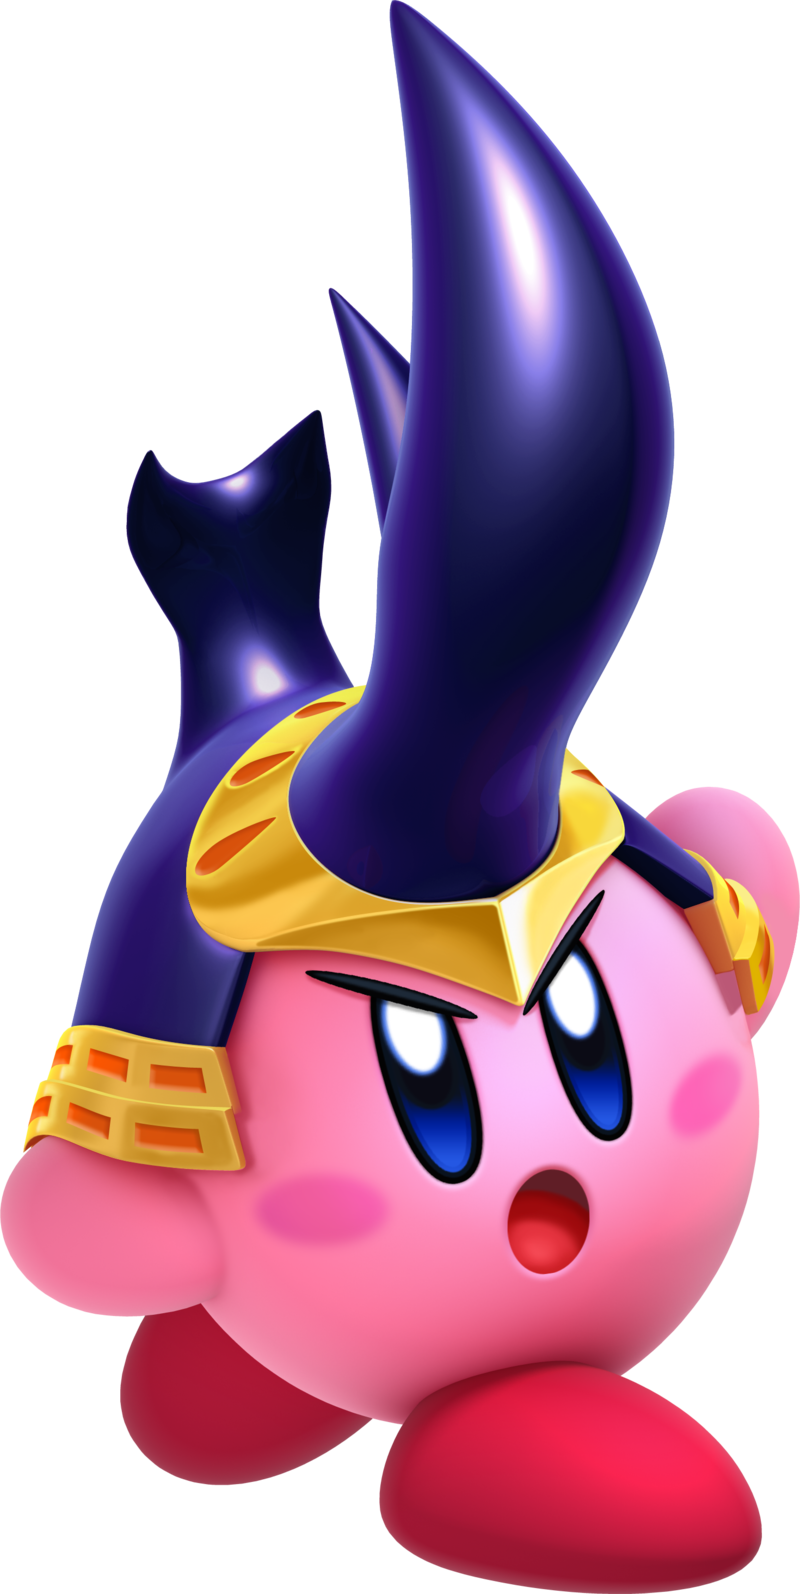 Kirby and the Forgotten Land Guides Wiki page: 1